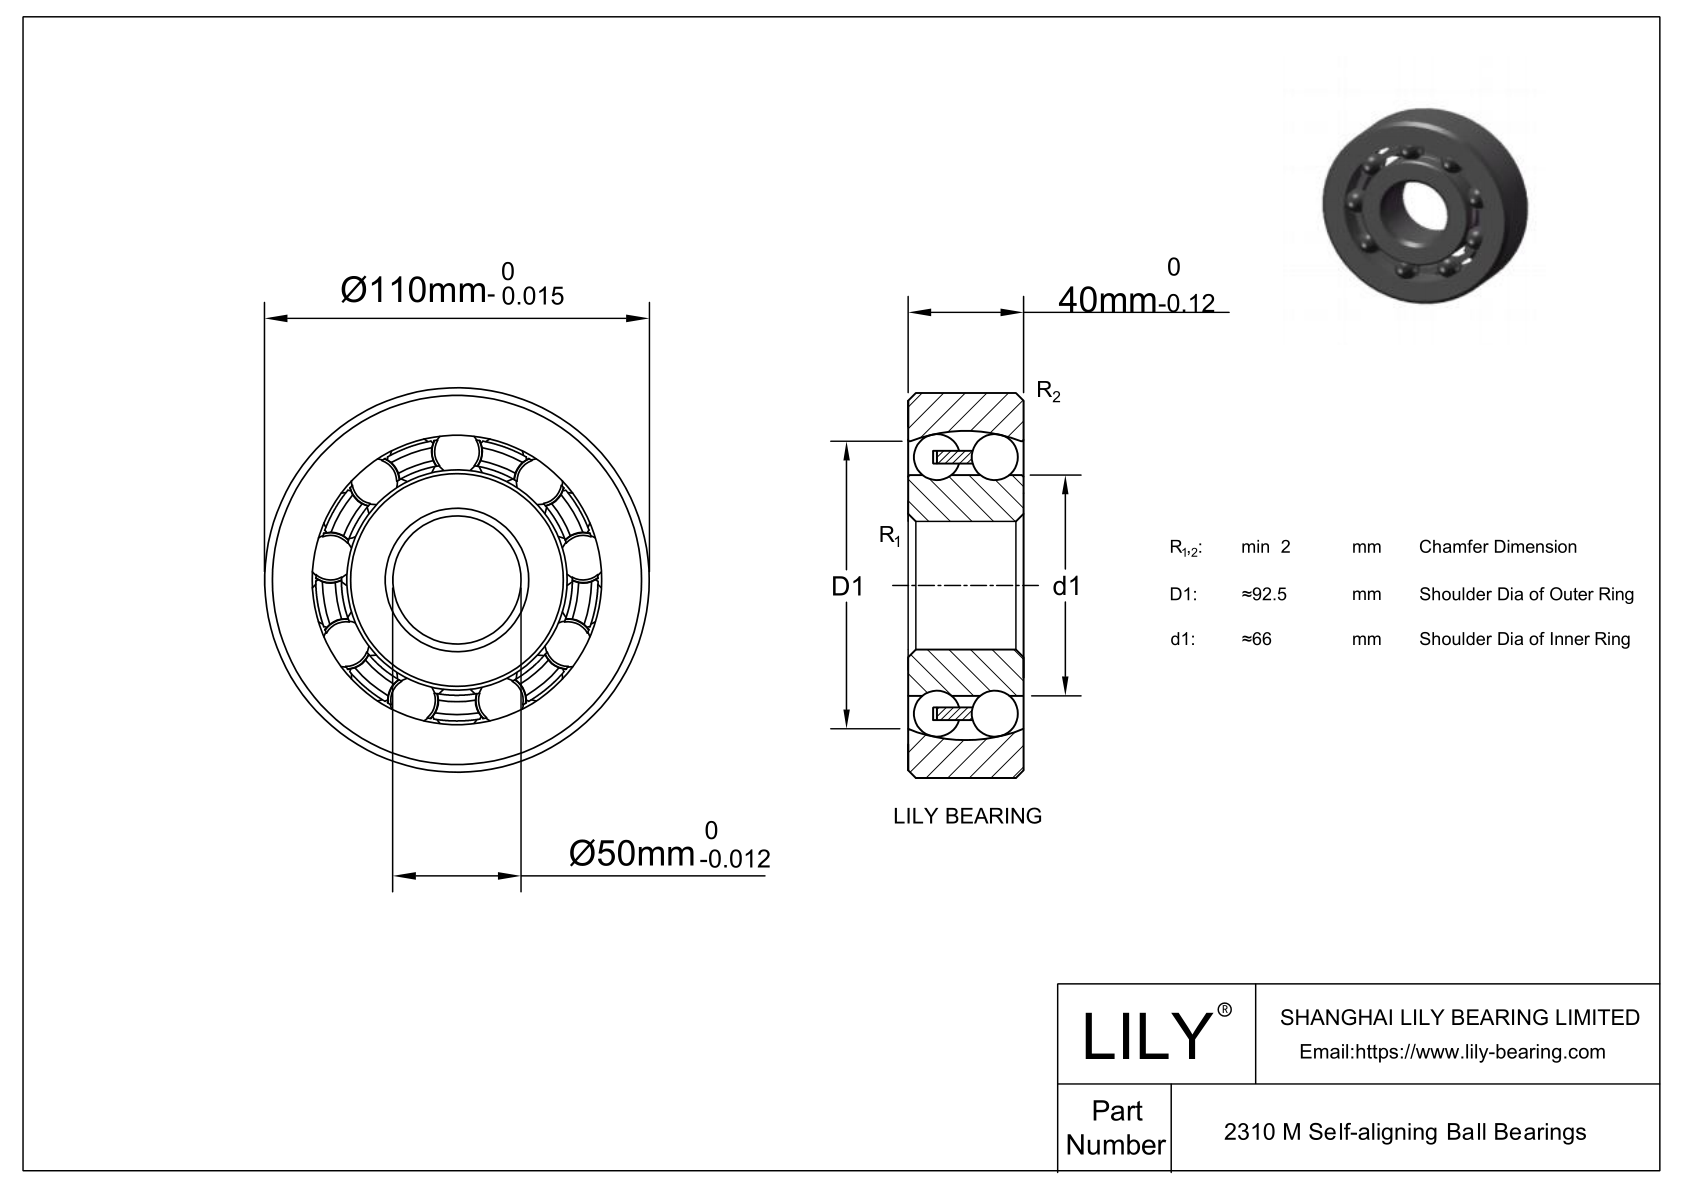 S2310 M Stainless Steel Self Aligning Ball Bearings cad drawing